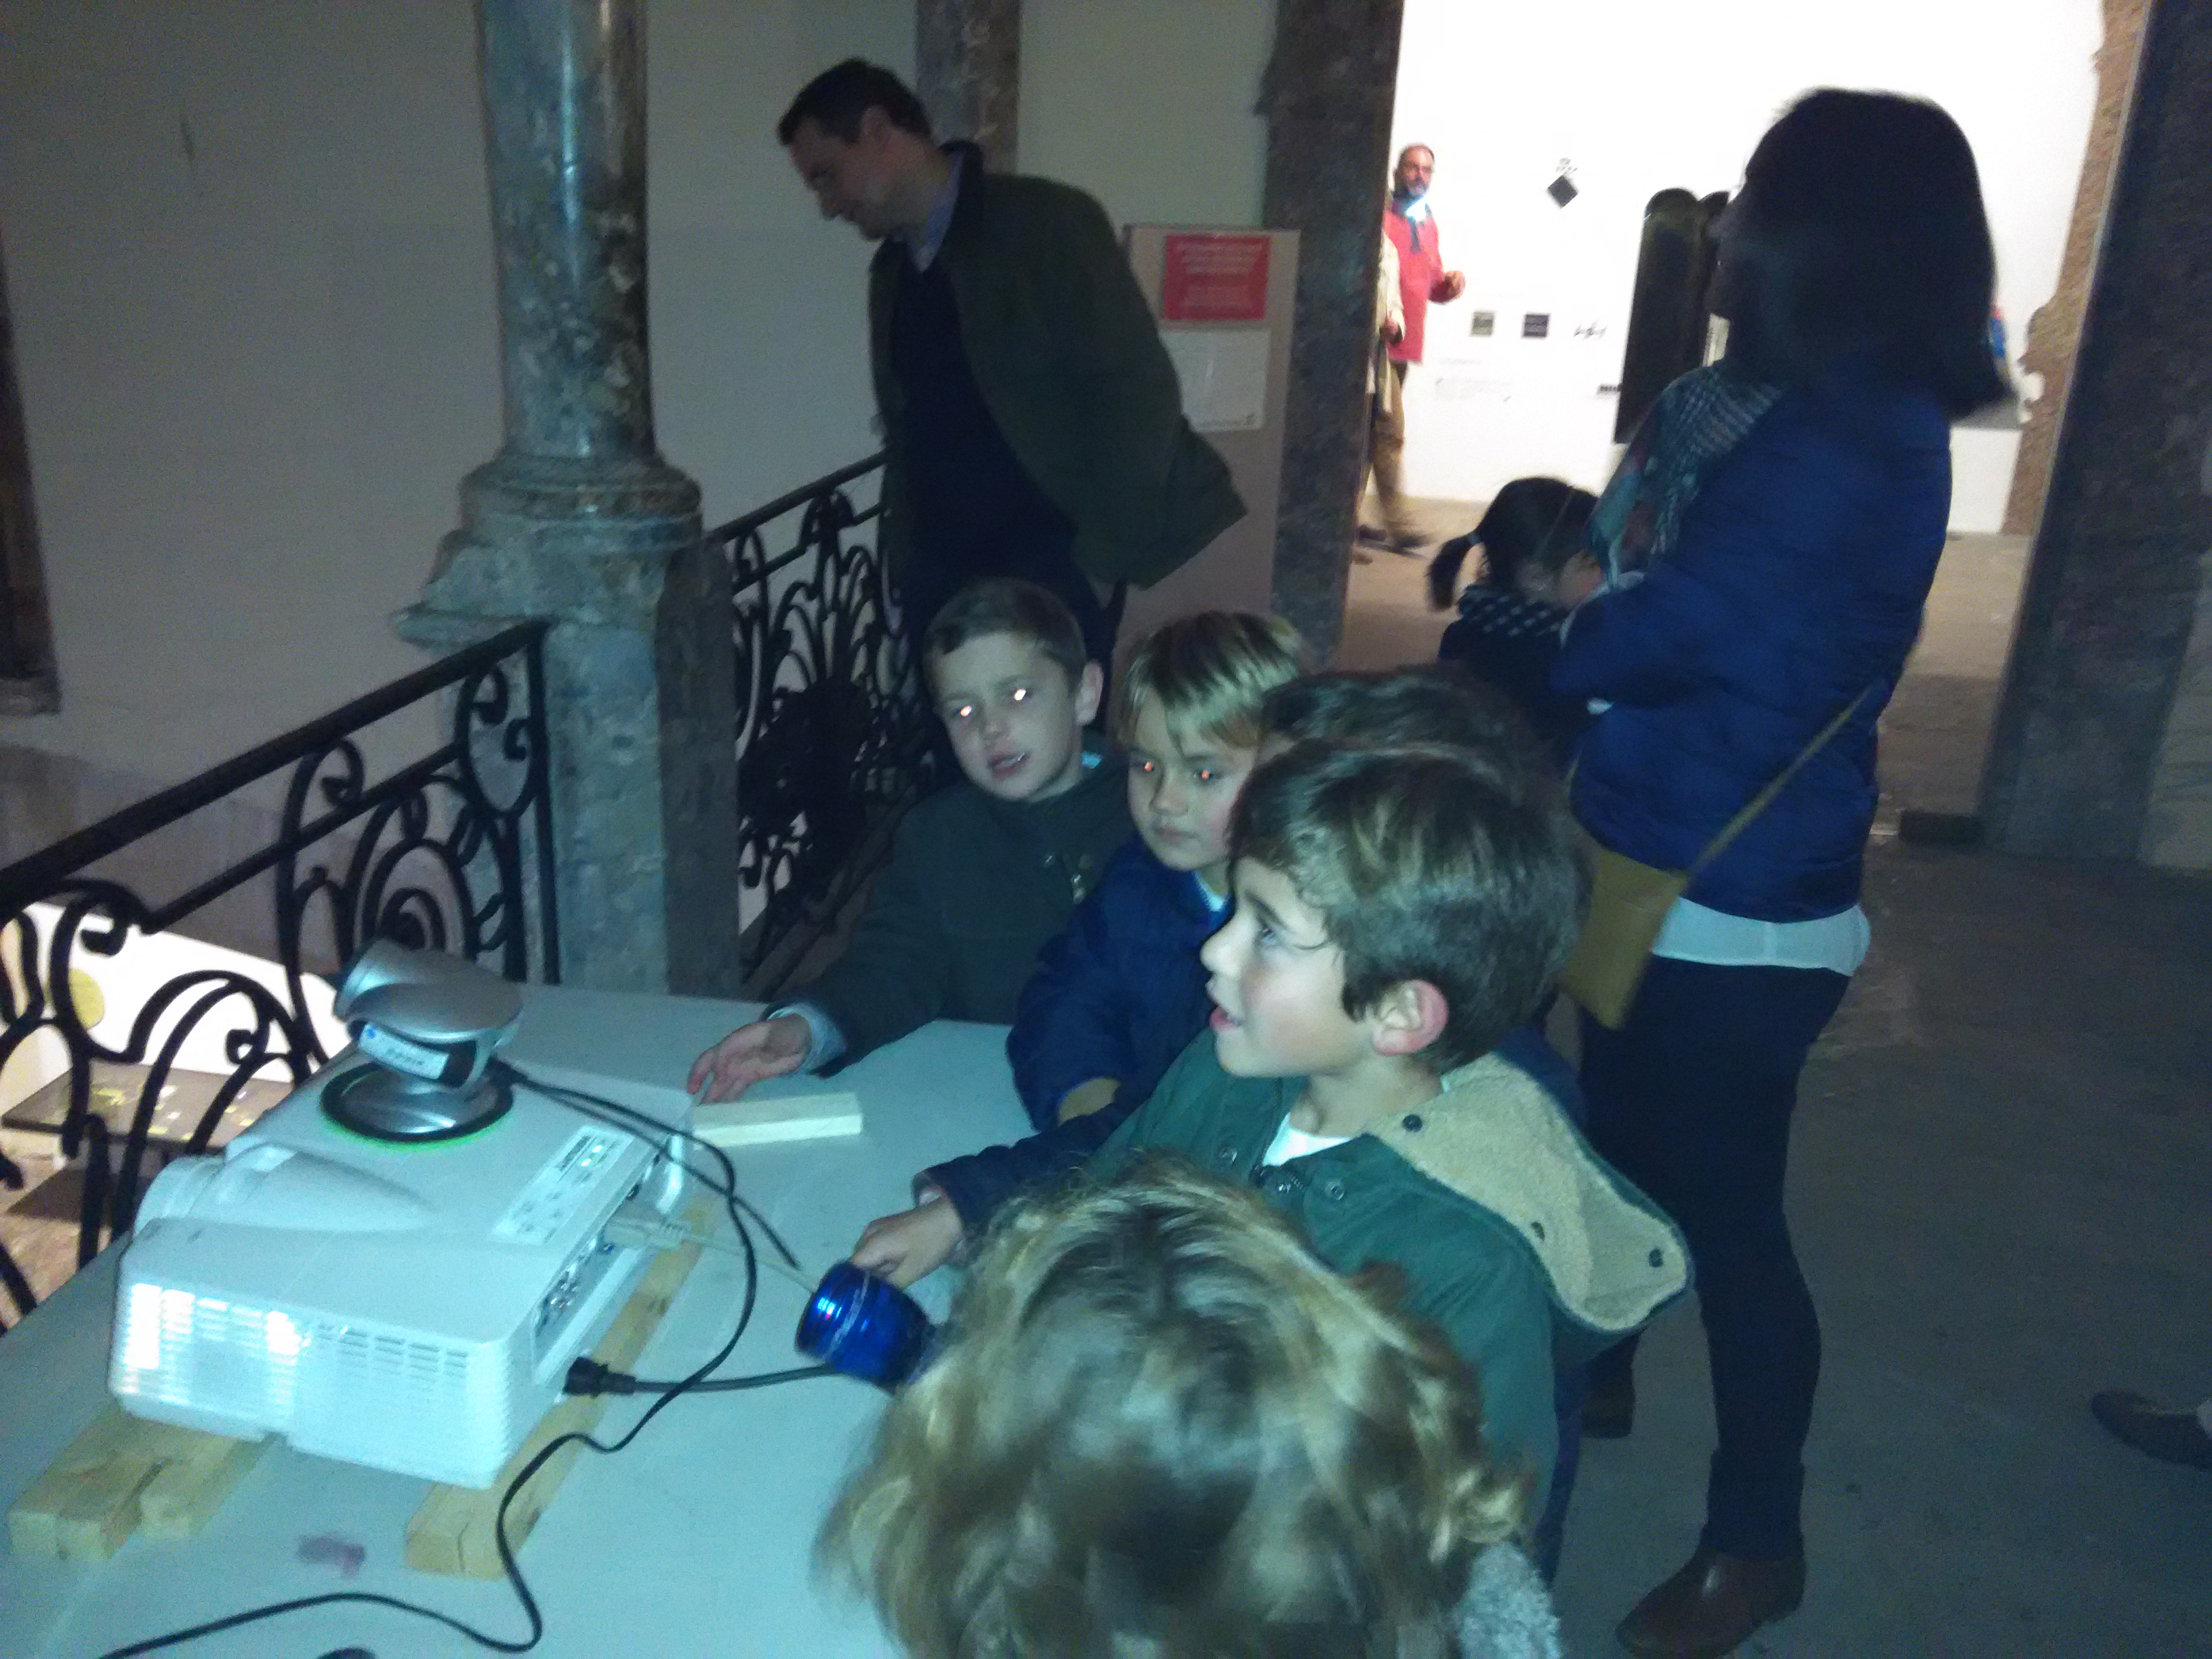 Kids visiting the Exposition